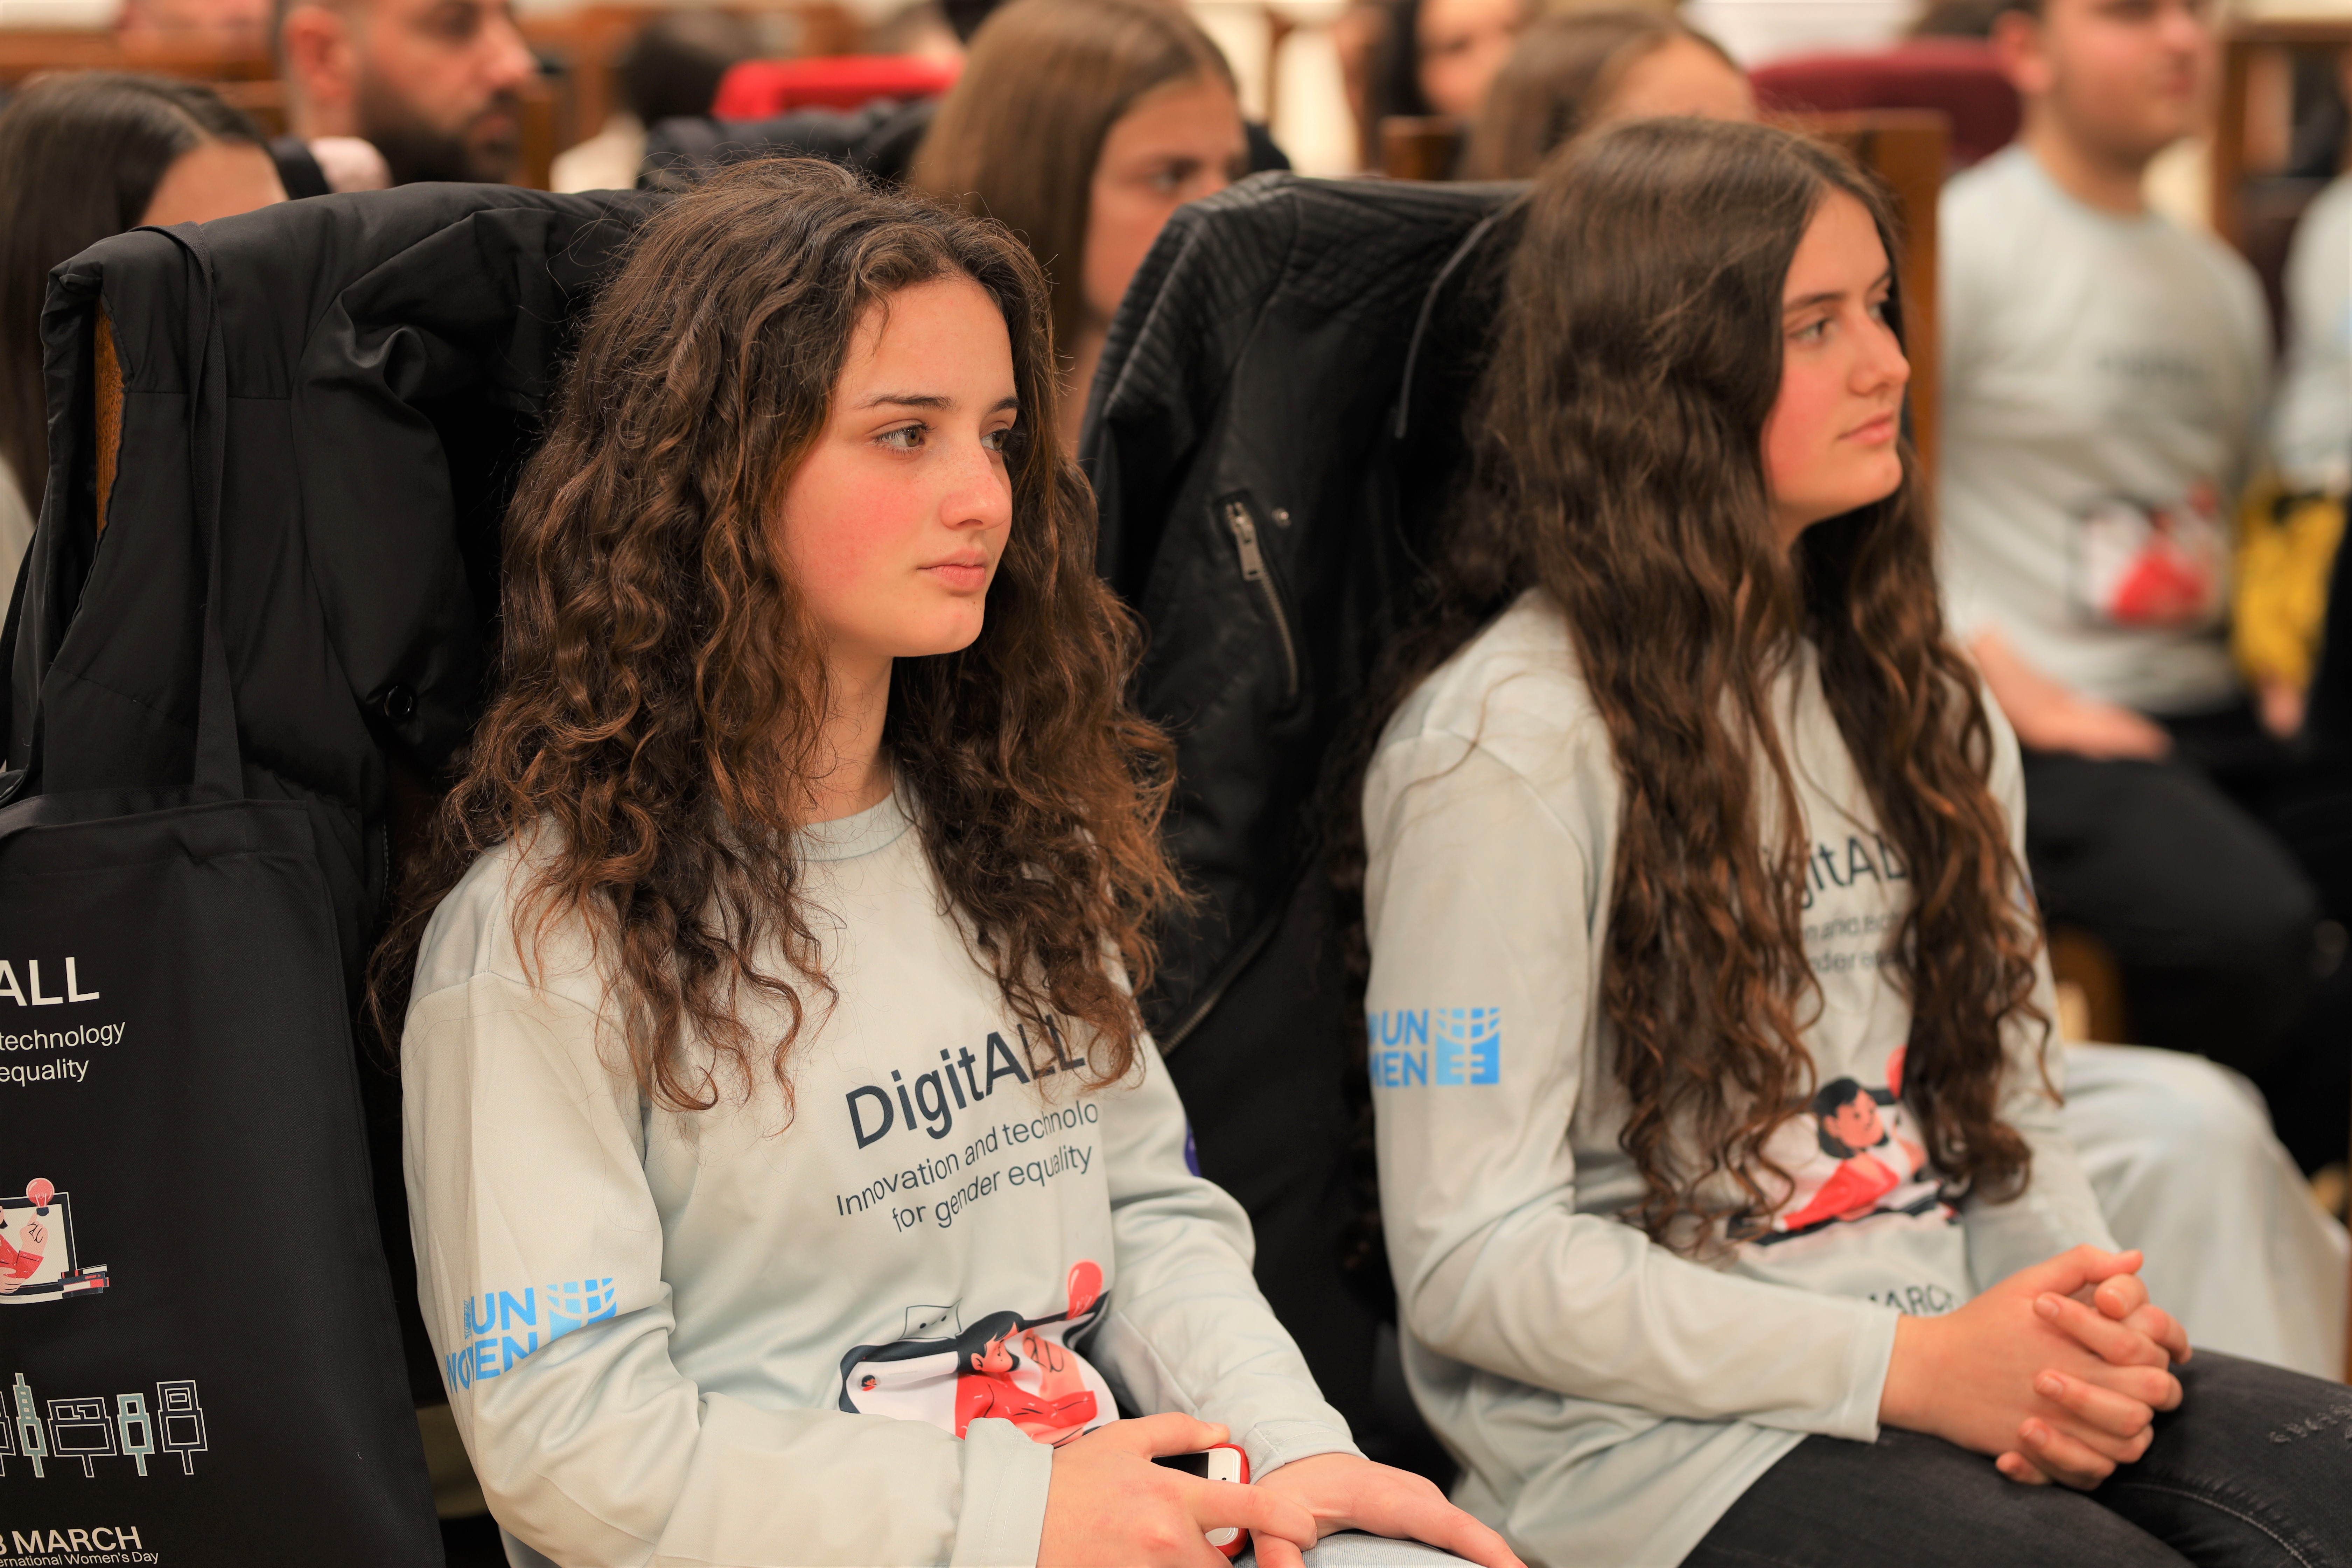 President of Kosovo, Vjosa Osmani and UN Women Kosovo Head of office, Vlora Nushi, participate in a discussion with young women and girls from five municipalities in Kosovo, organized on the occasion of International Women’s Day 2023 in Pristina, Kosovo. Photos: UN Women.